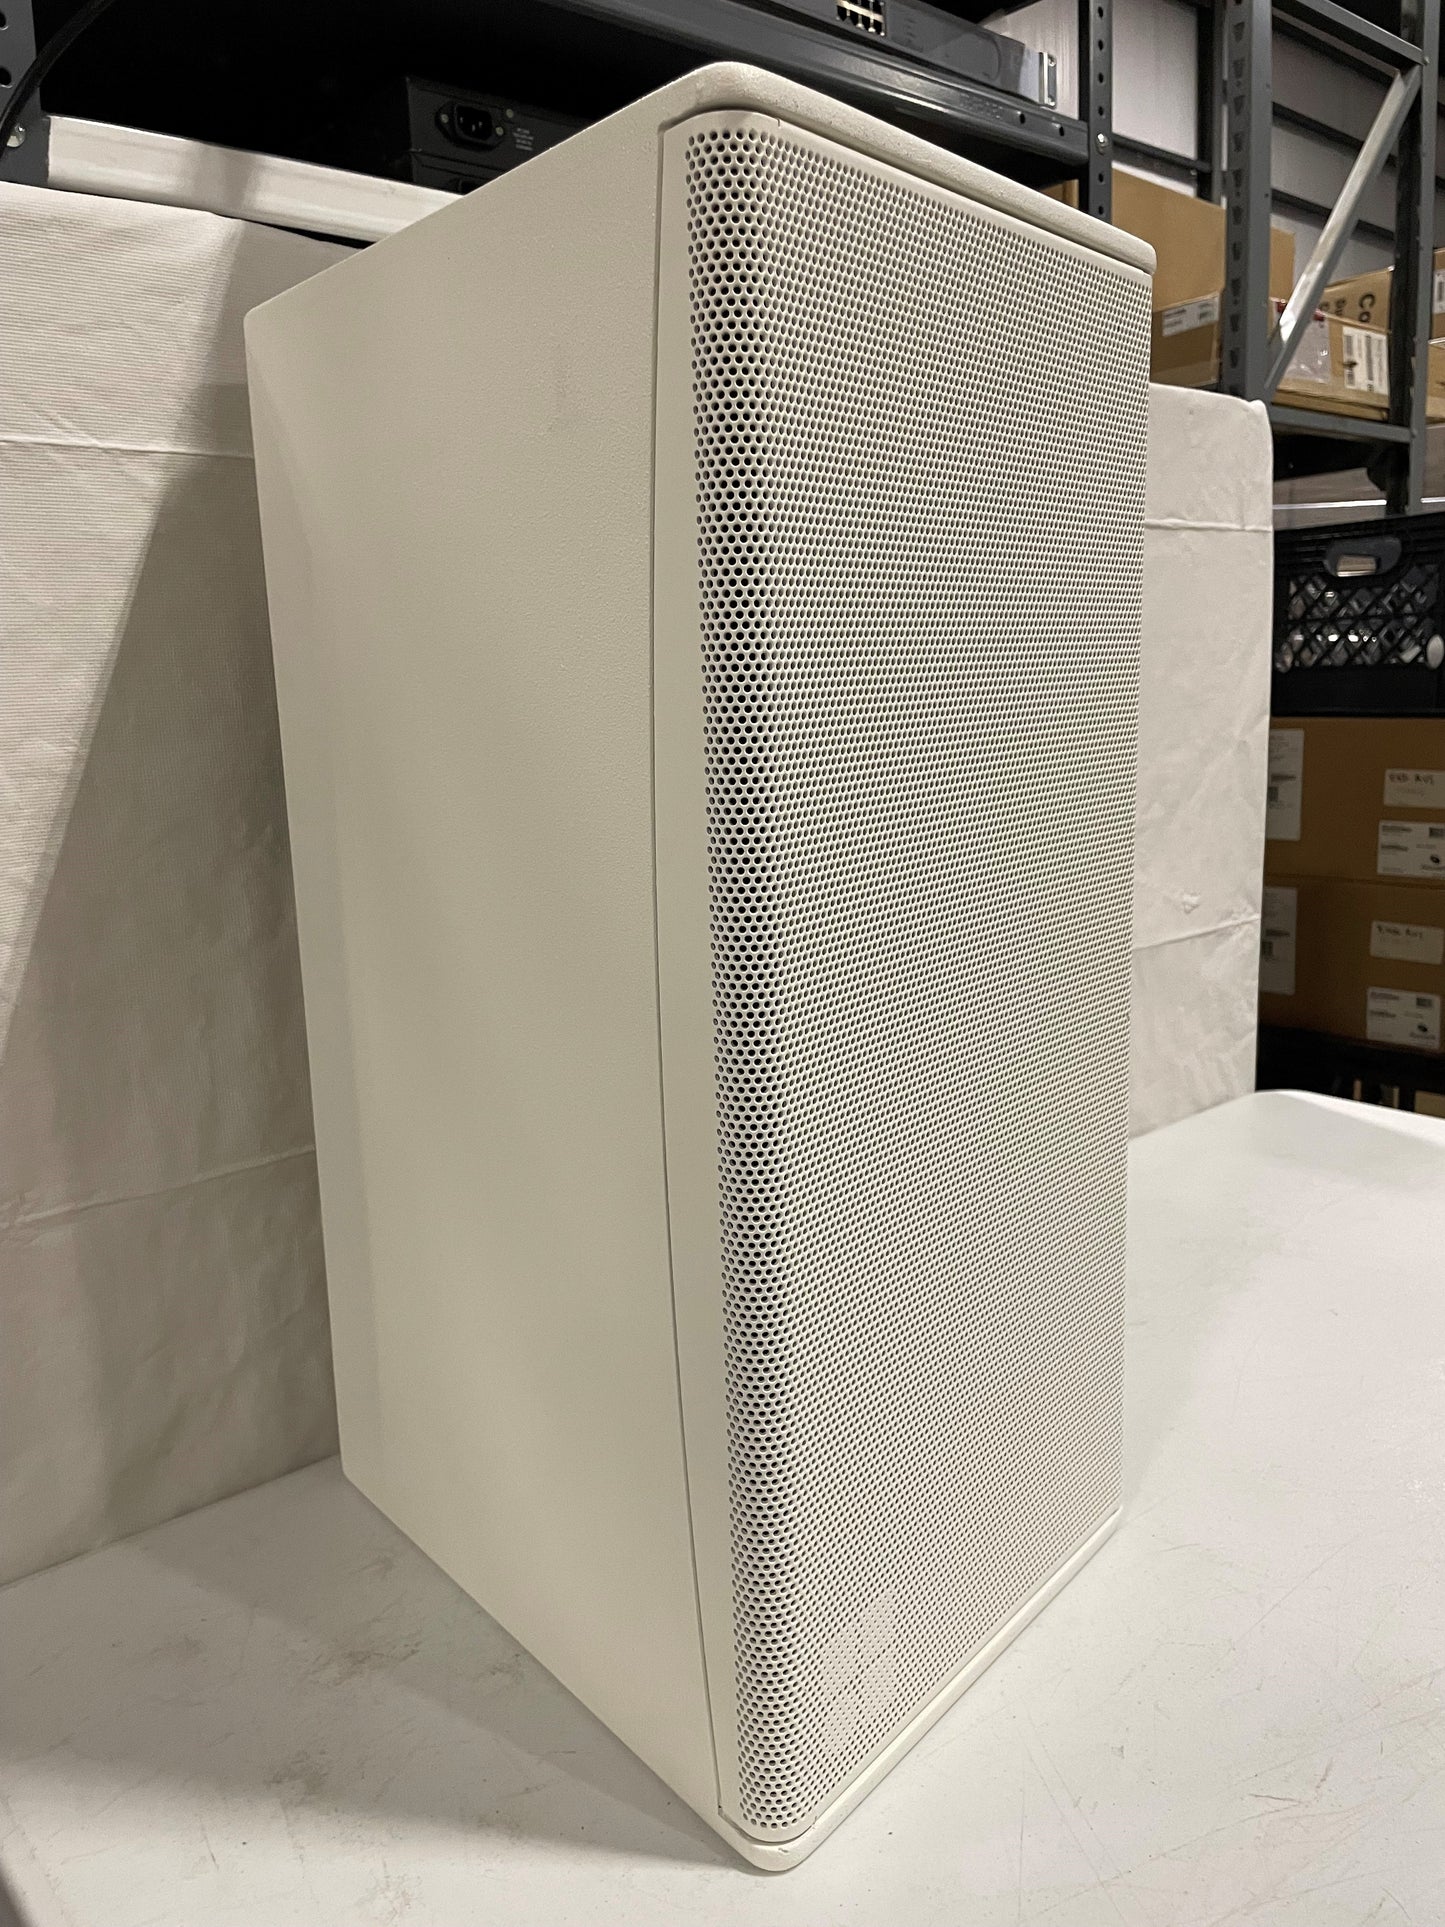 d&b 10S-D Speaker, White. We Sell Professional Audio Equipment. Audio Systems, Amplifiers, Consoles, Mixers, Electronics, Entertainment, Sound, Live.